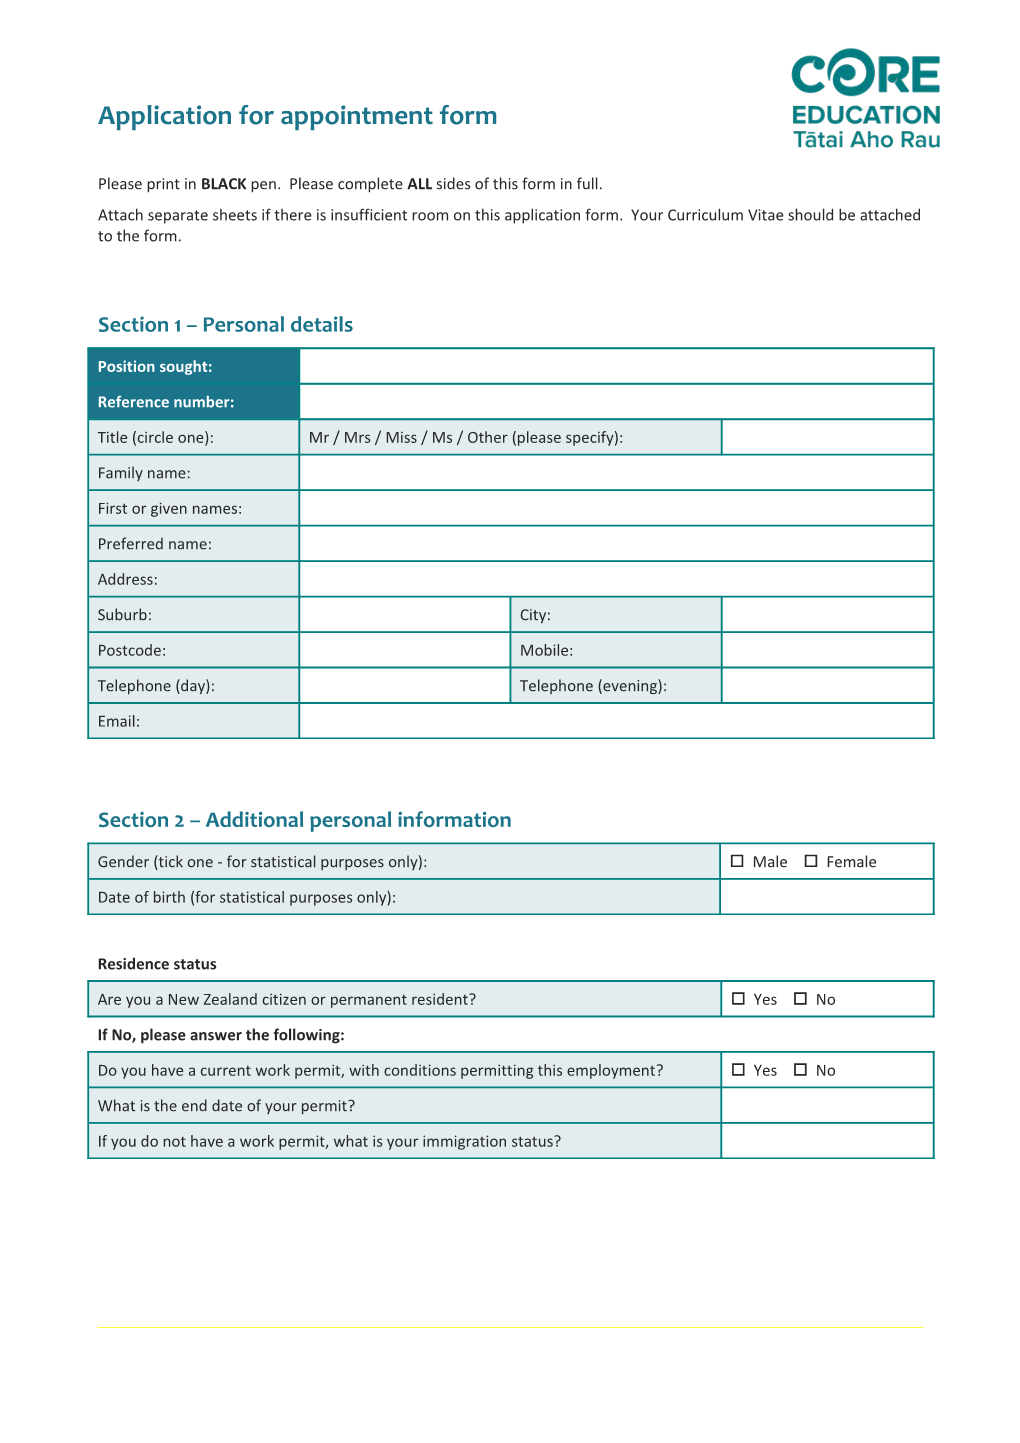 Application for Appointment Form